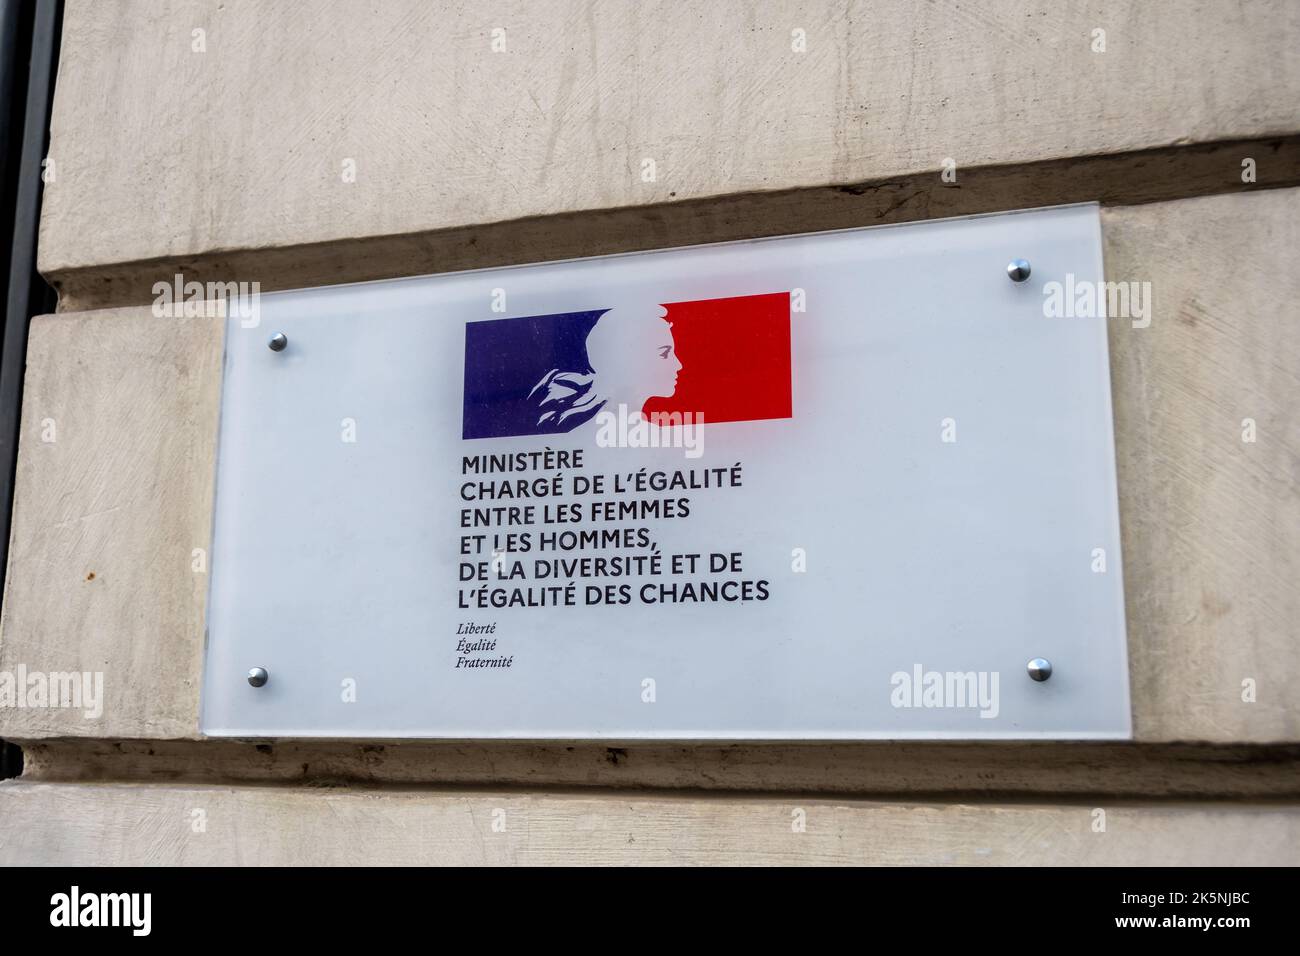 Close-up of the plaque attached to the entrance of the Ministry responsible for equality between women and men, Paris, France Stock Photo